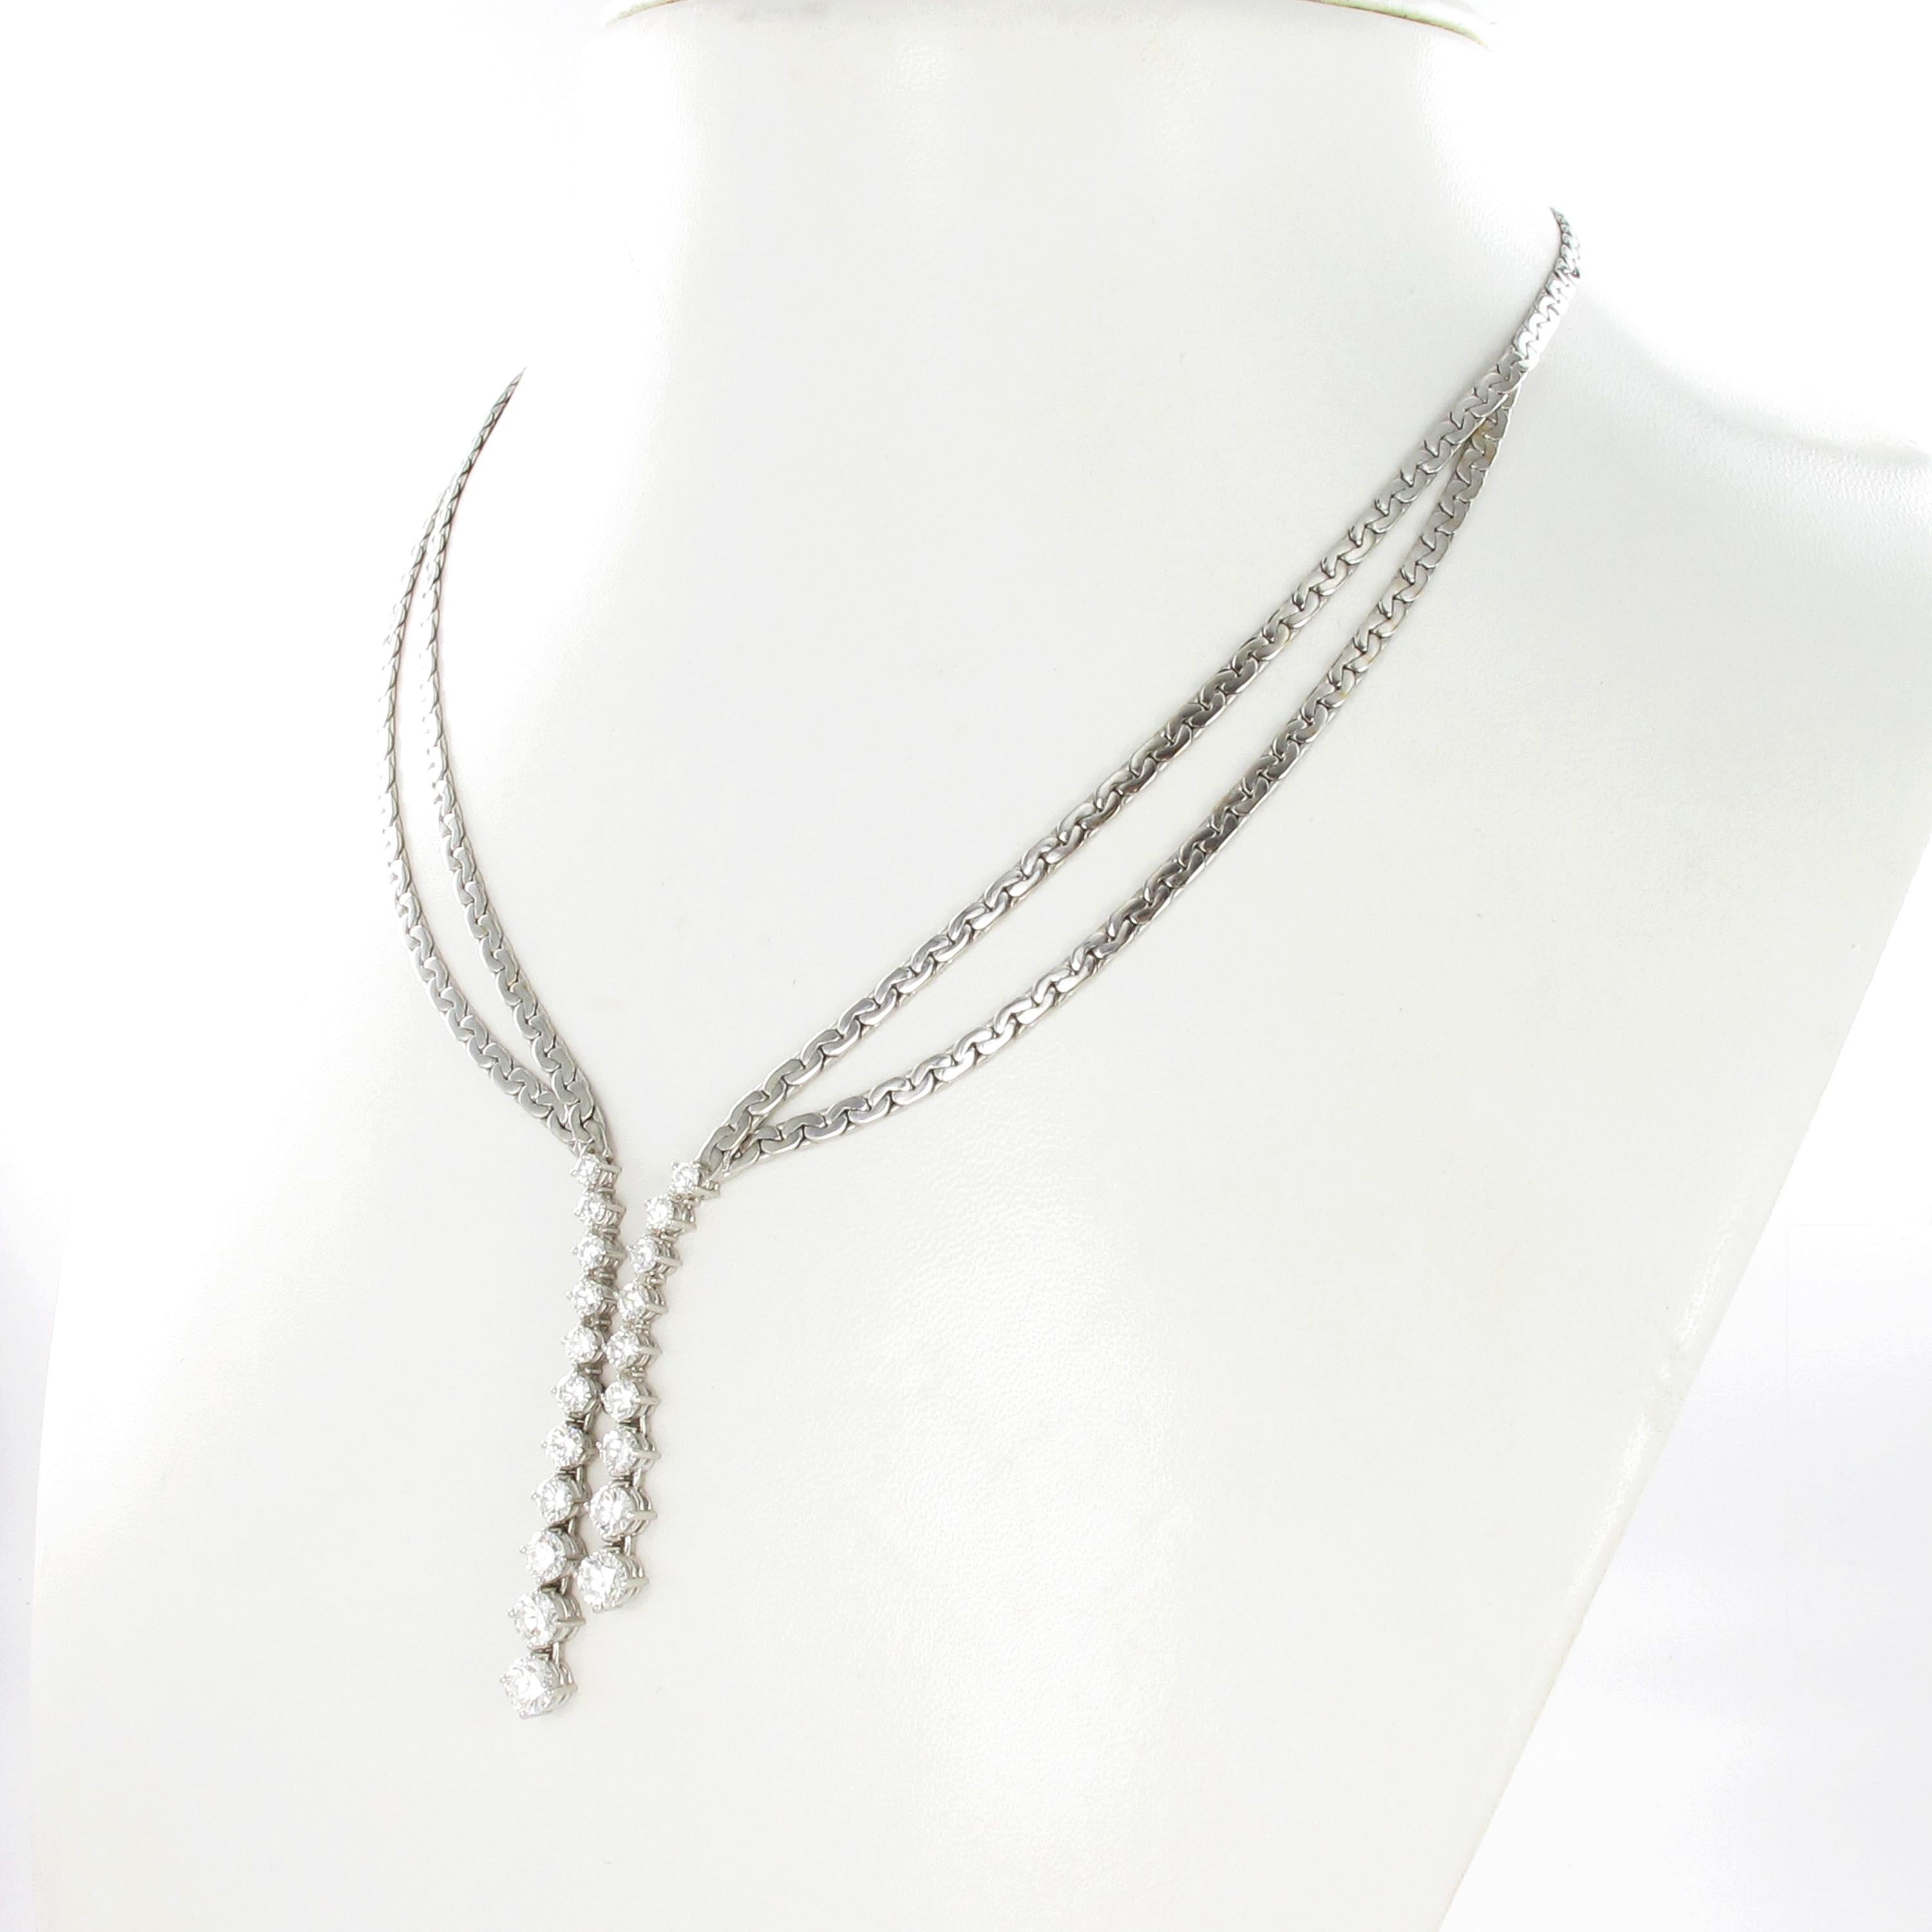 This elegantly shaped necklace in 18 karat white gold is set with 20 brilliant-cut diamonds of G/H colour and vvs clarity, total weight approximately 3.96 carats.
The necklace consists of a flat, soft chain, which is divided into two strands on the